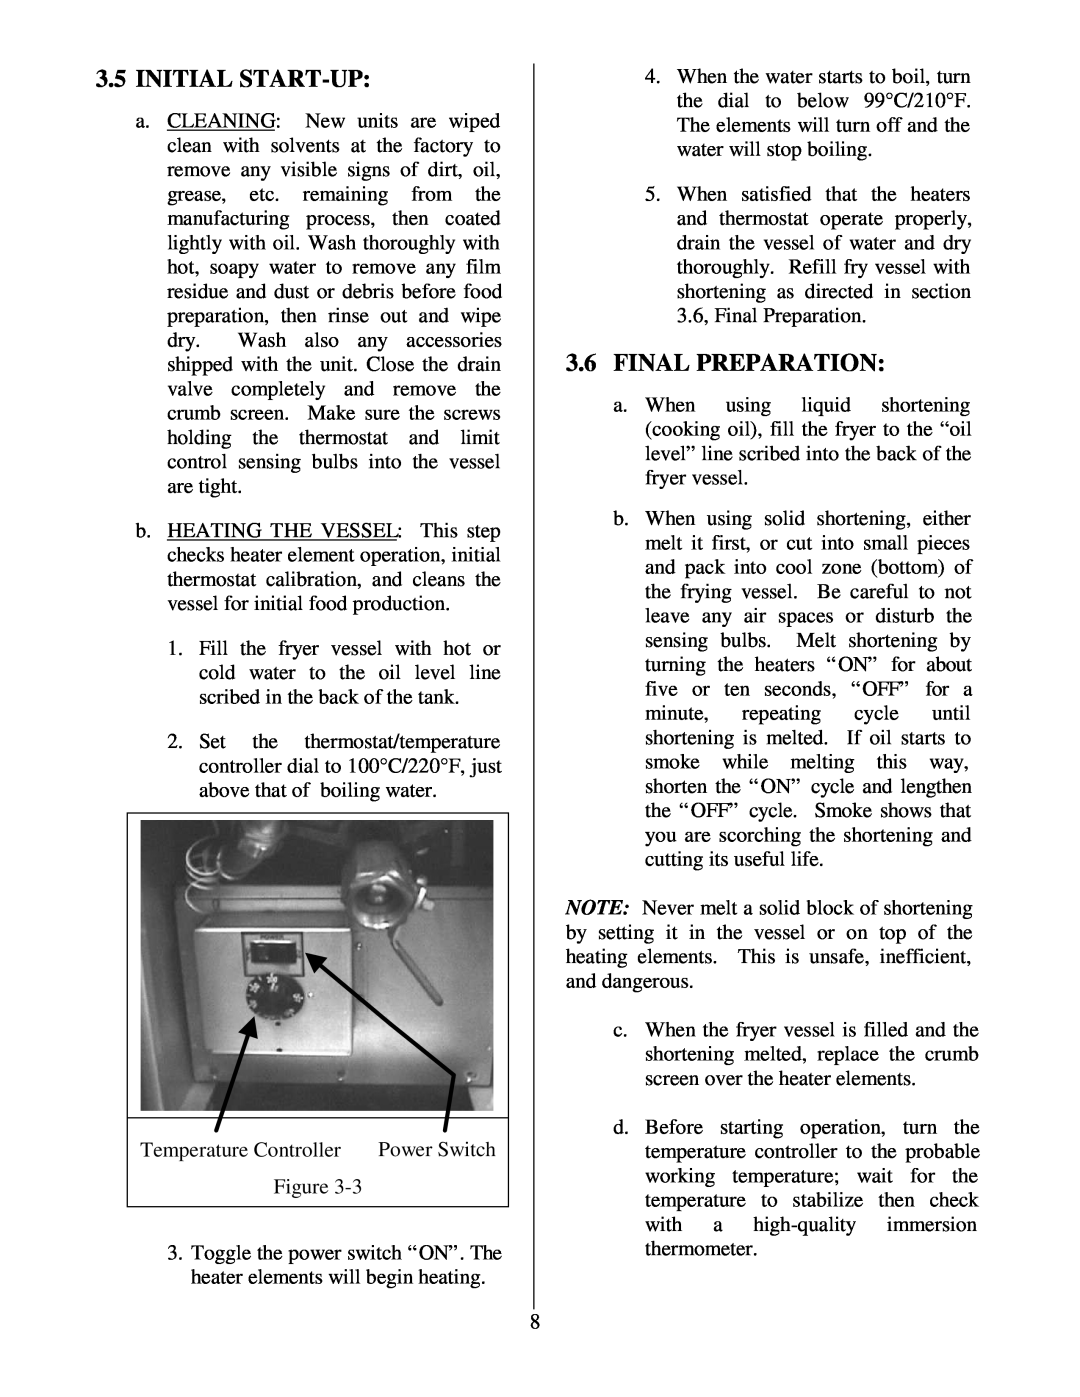 Frymaster Electric Fryer operation manual 3.5INITIAL START-UP, 3.6FINAL PREPARATION 